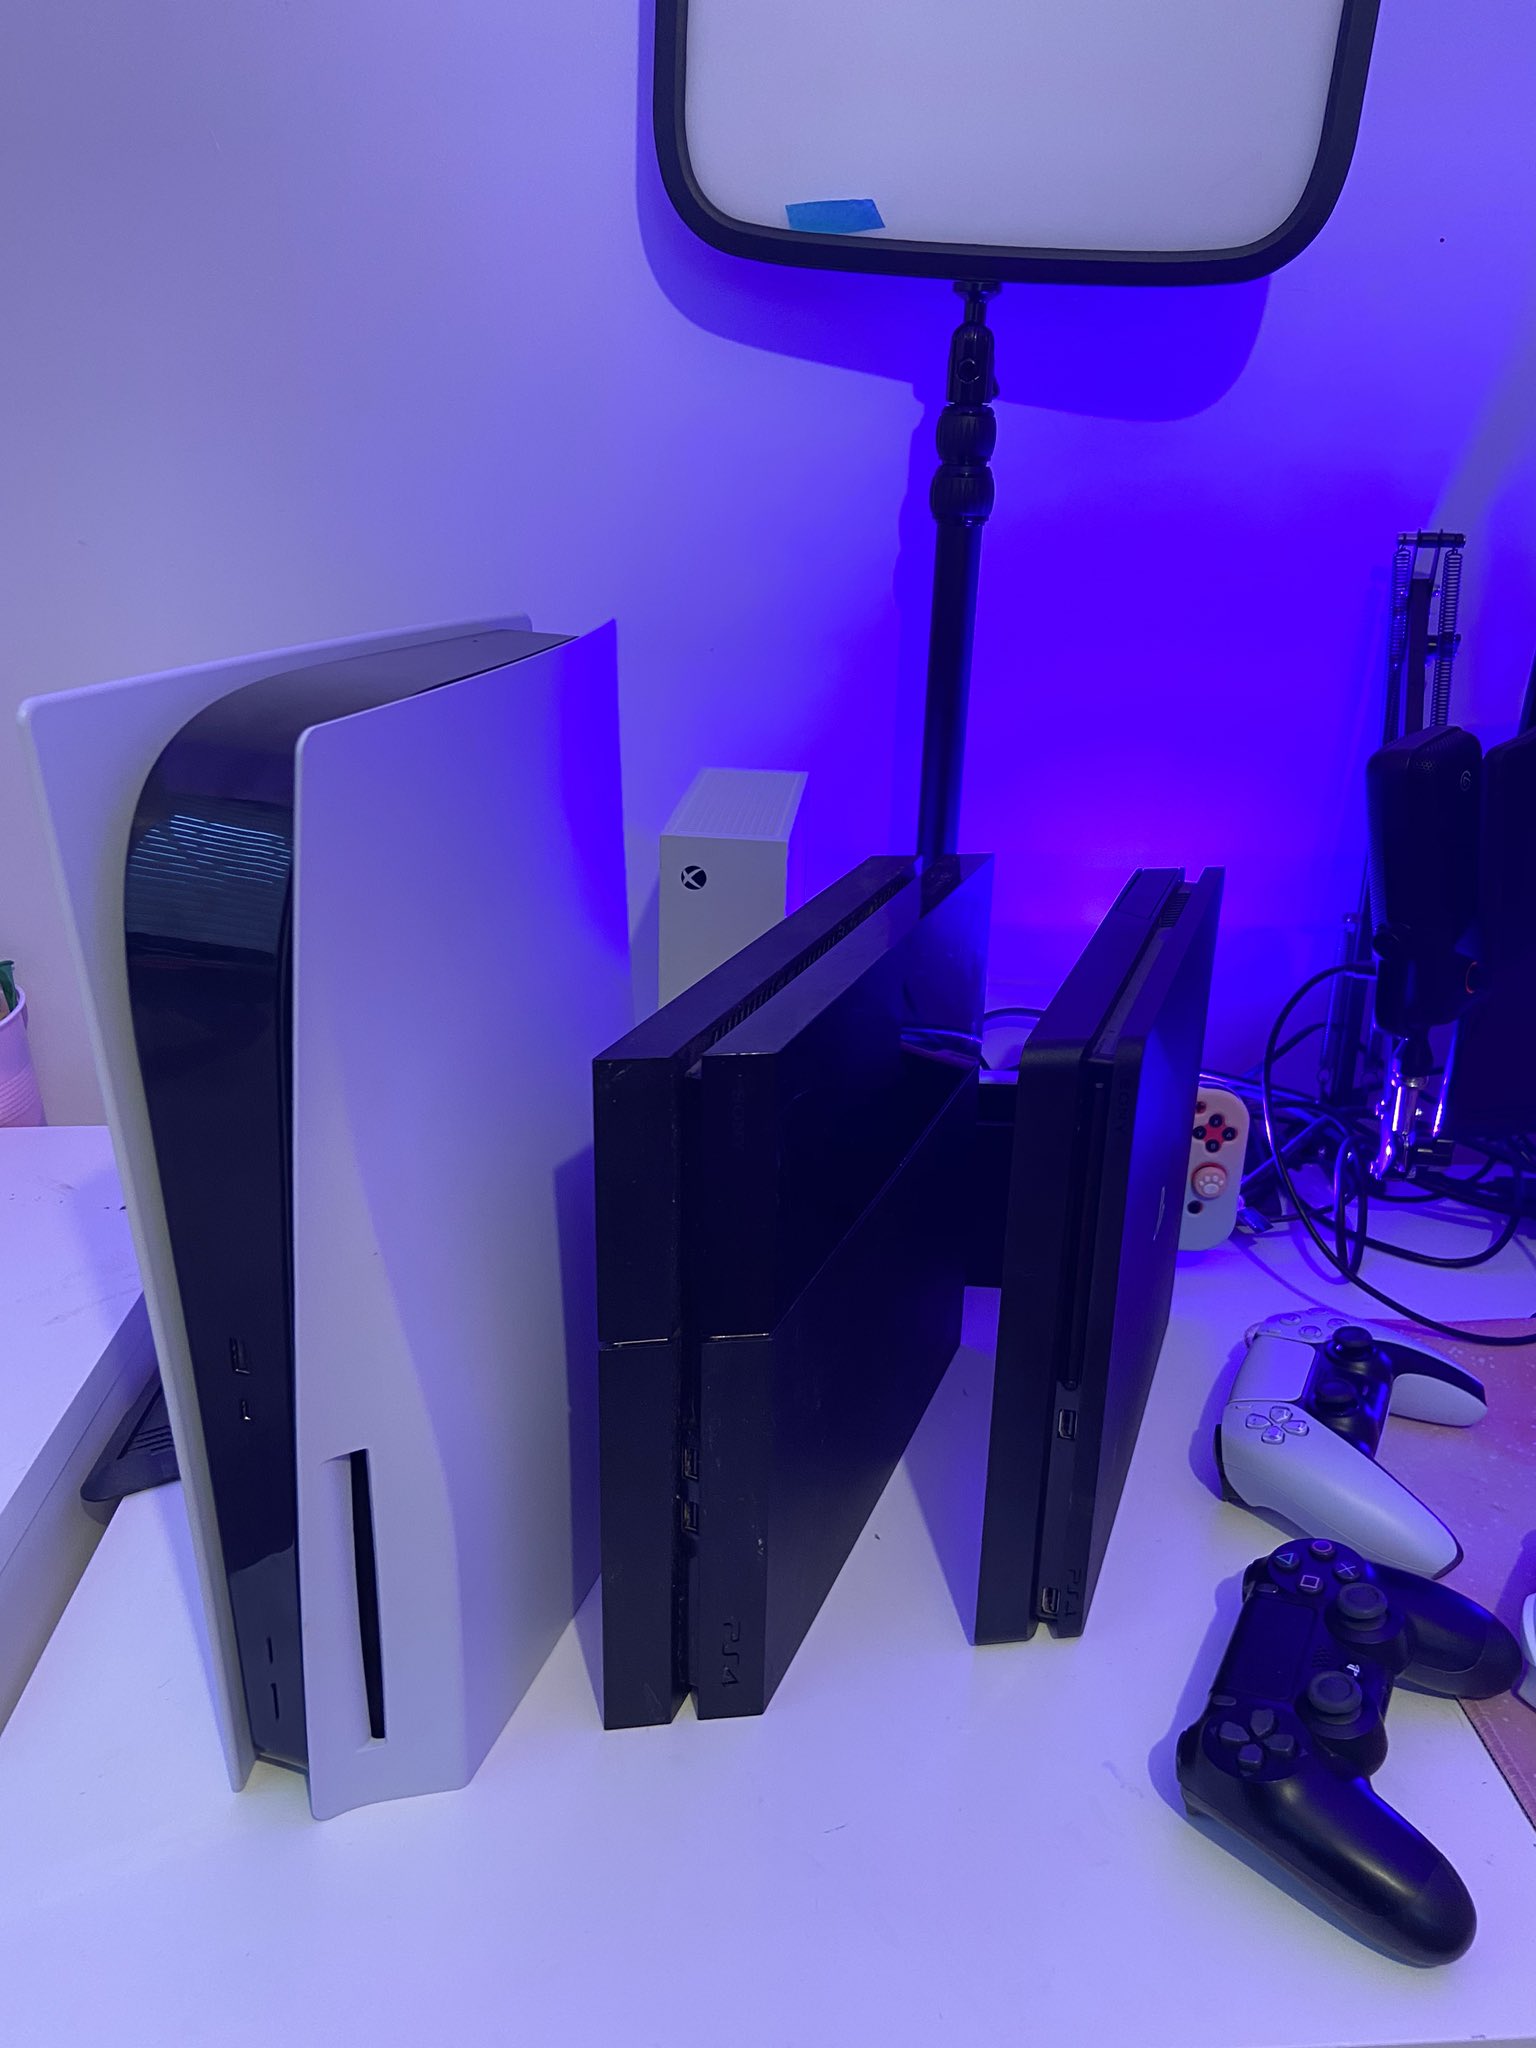 New PS5 Slim Size Comparison With Regular PS5